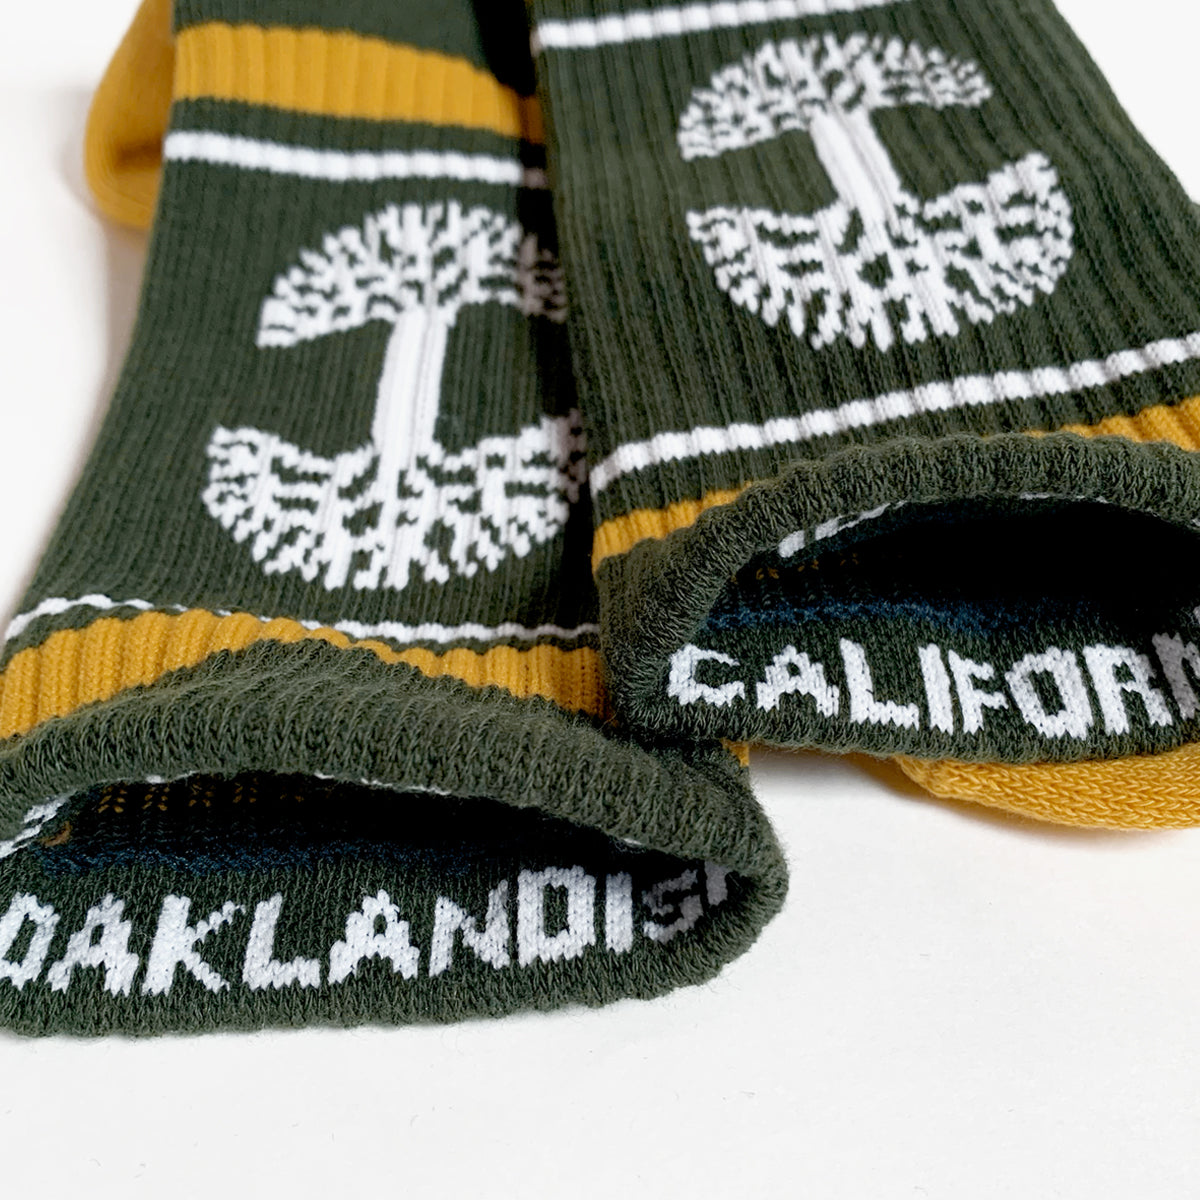 The top of green Oaklandish crew socks exposing OAKLAND and CALIFORNIA wordmarks on the inner cuffs.